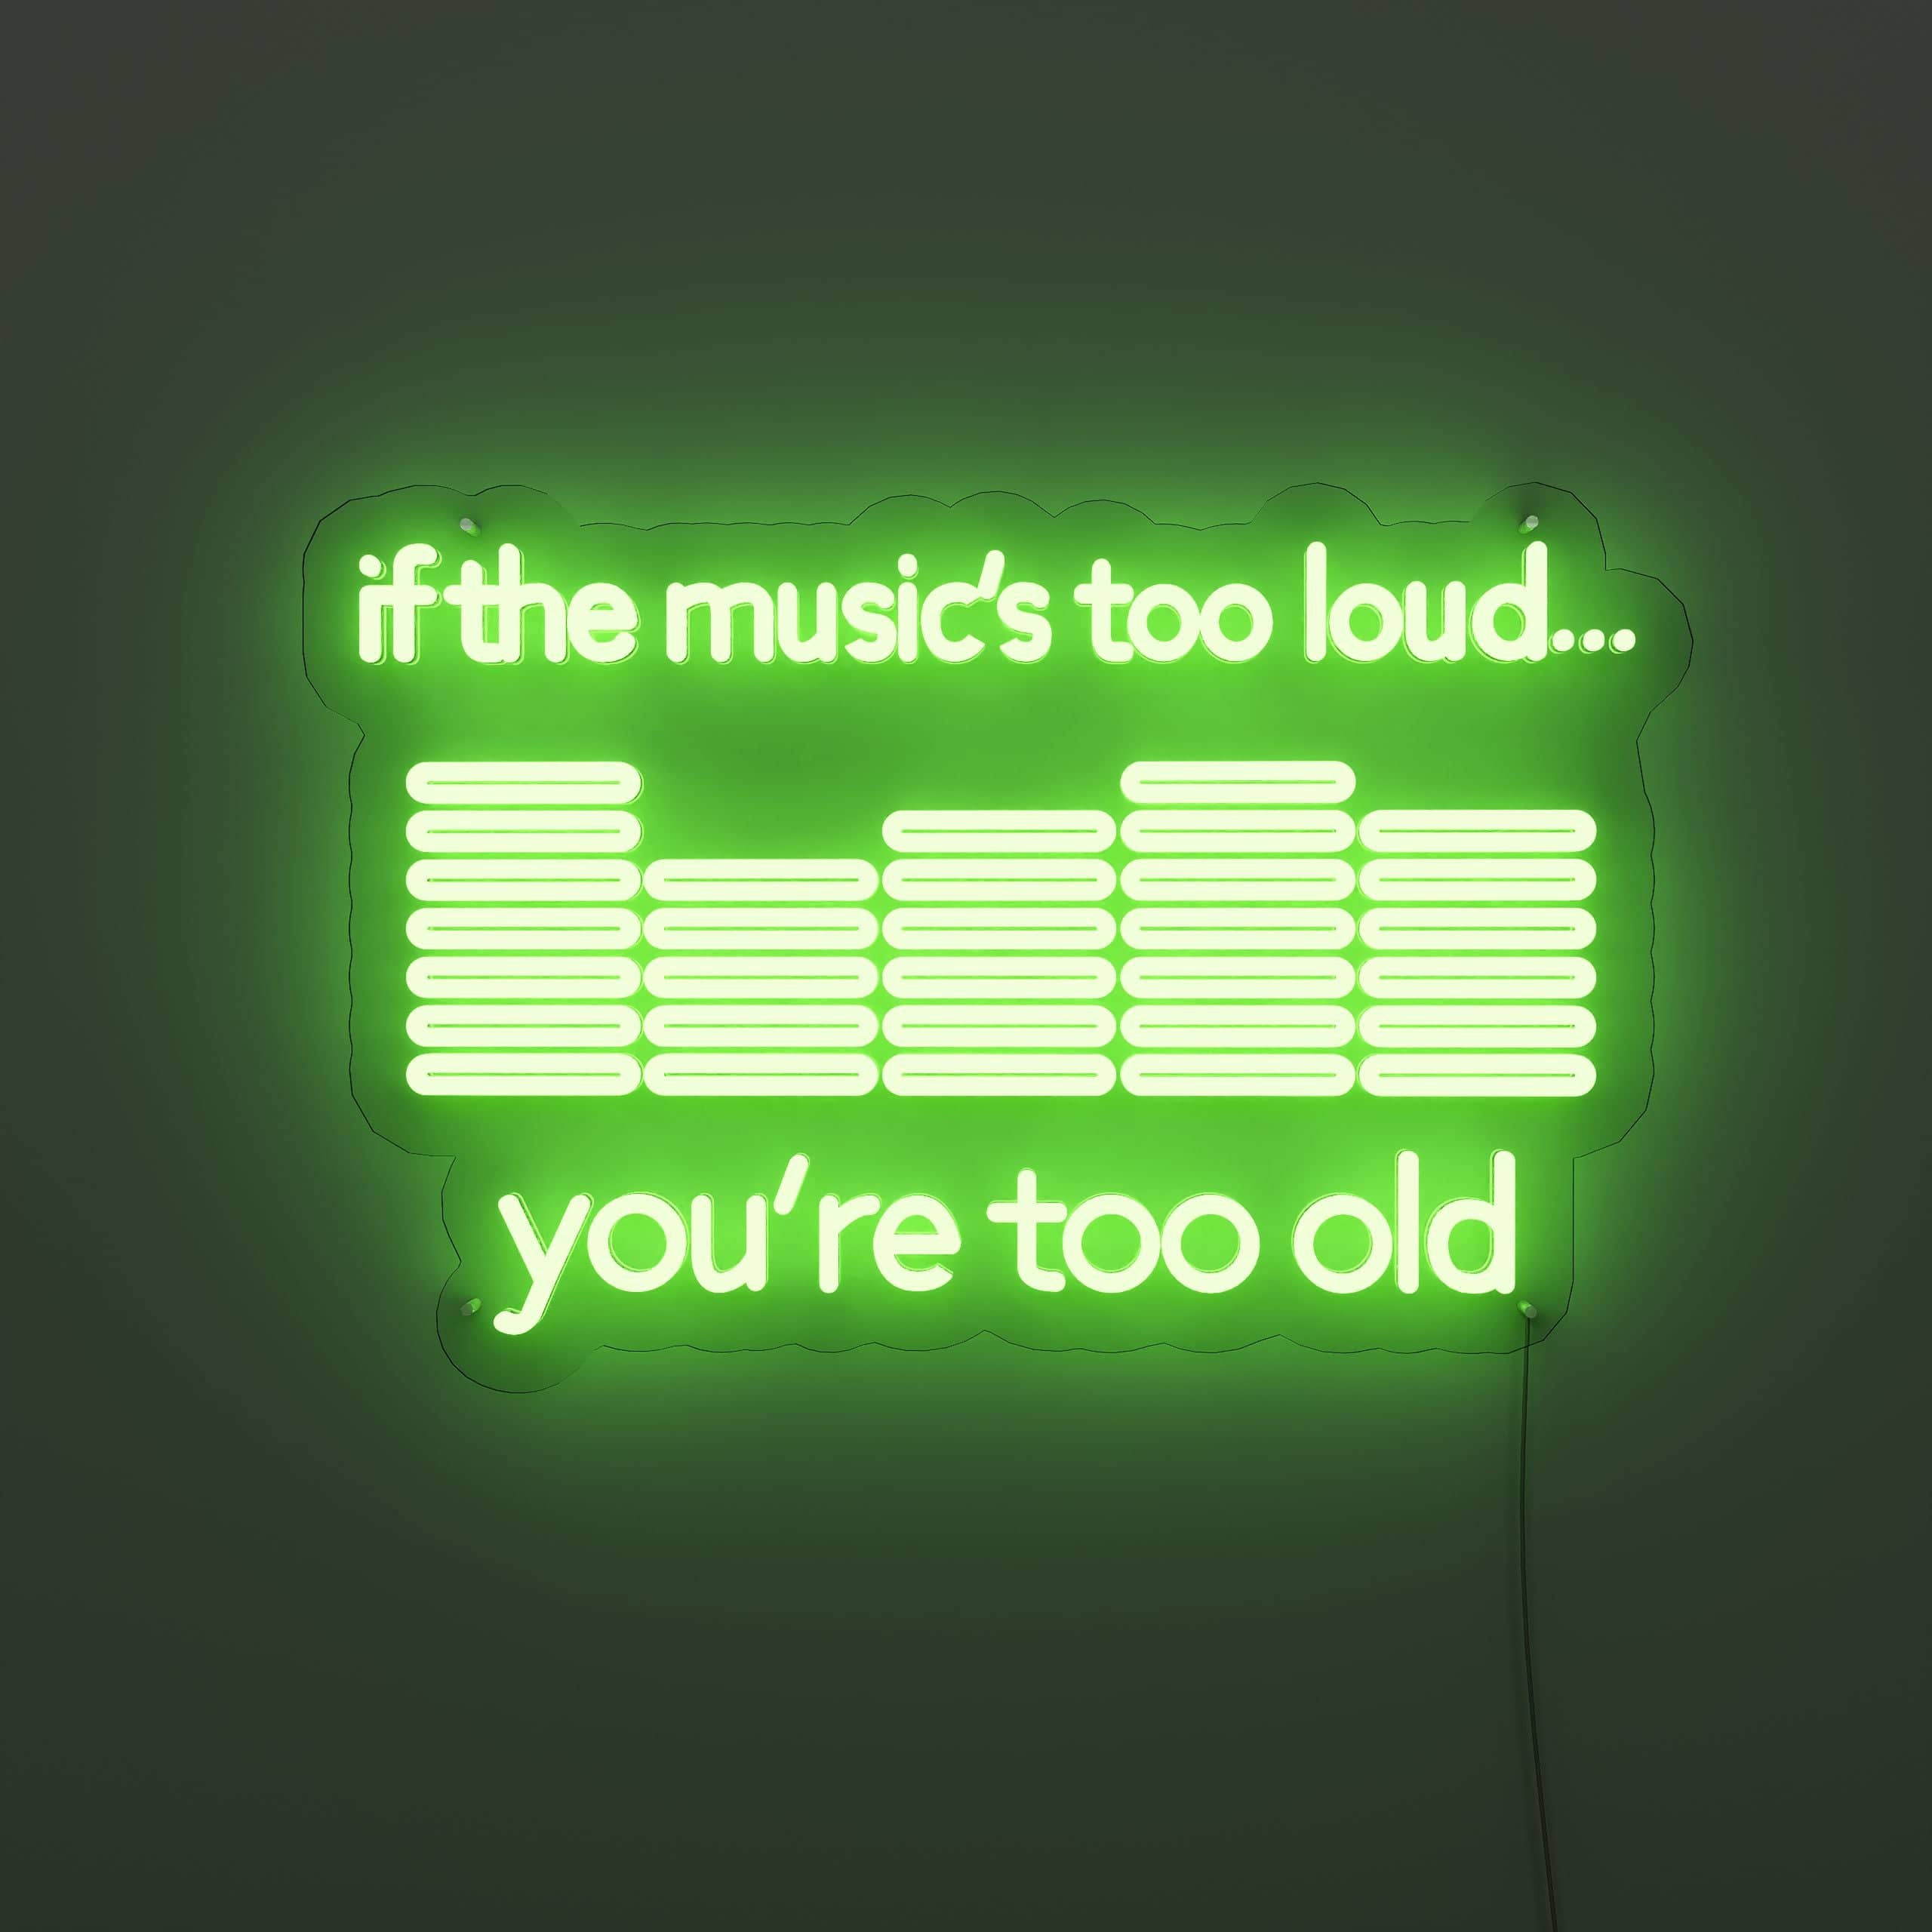 feel-the-loud-sounds-neon-sign-lite